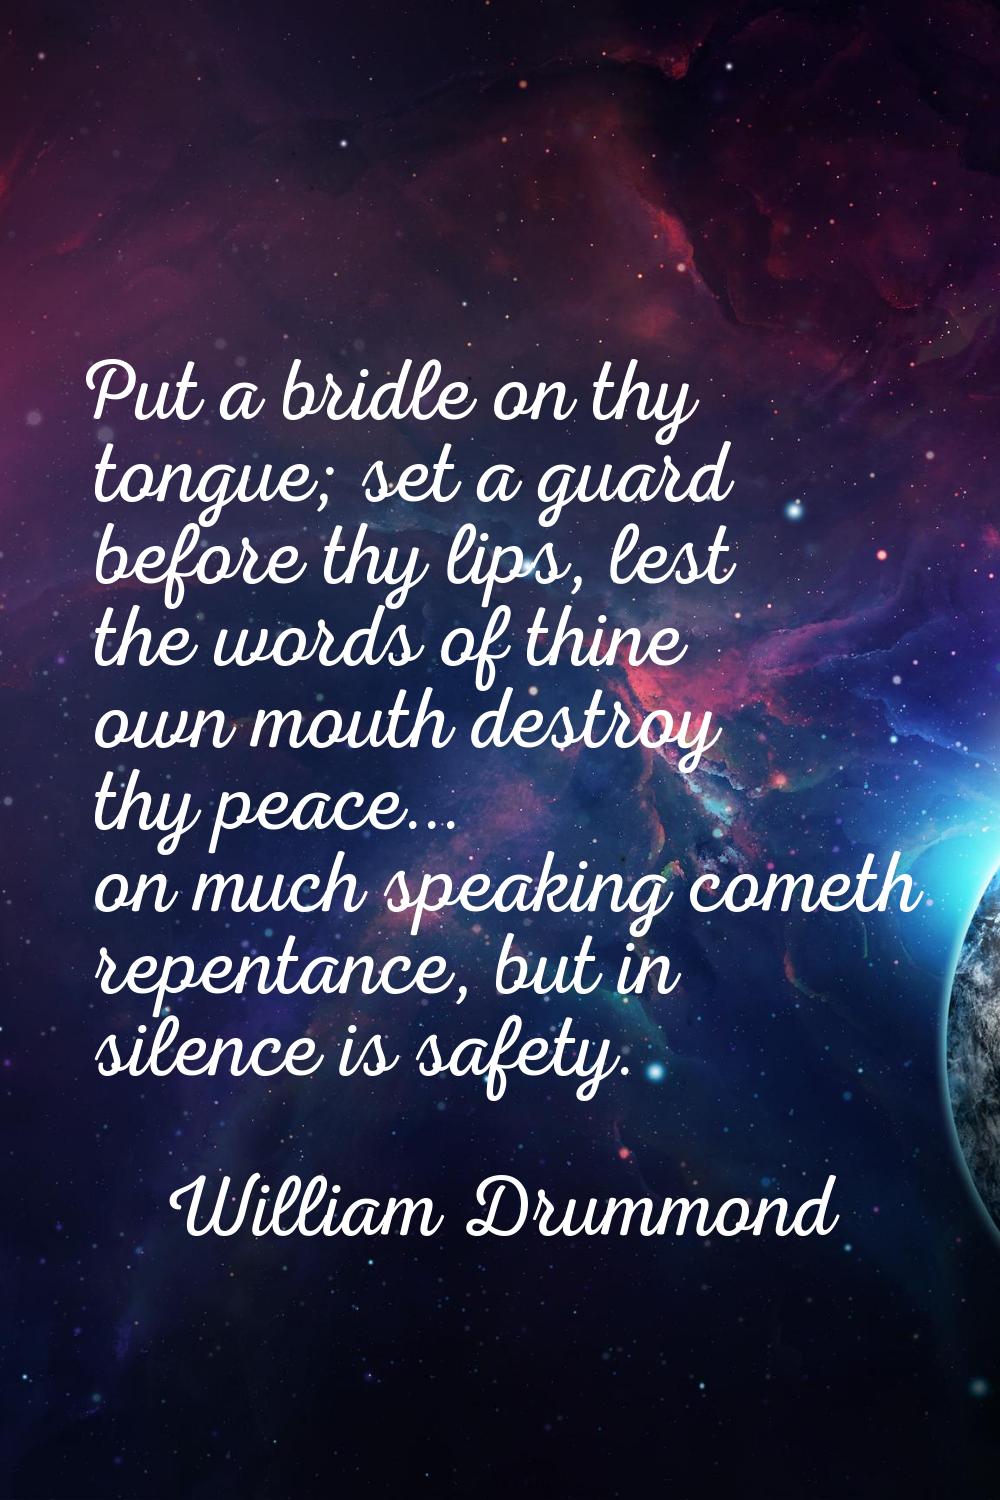 Put a bridle on thy tongue; set a guard before thy lips, lest the words of thine own mouth destroy 